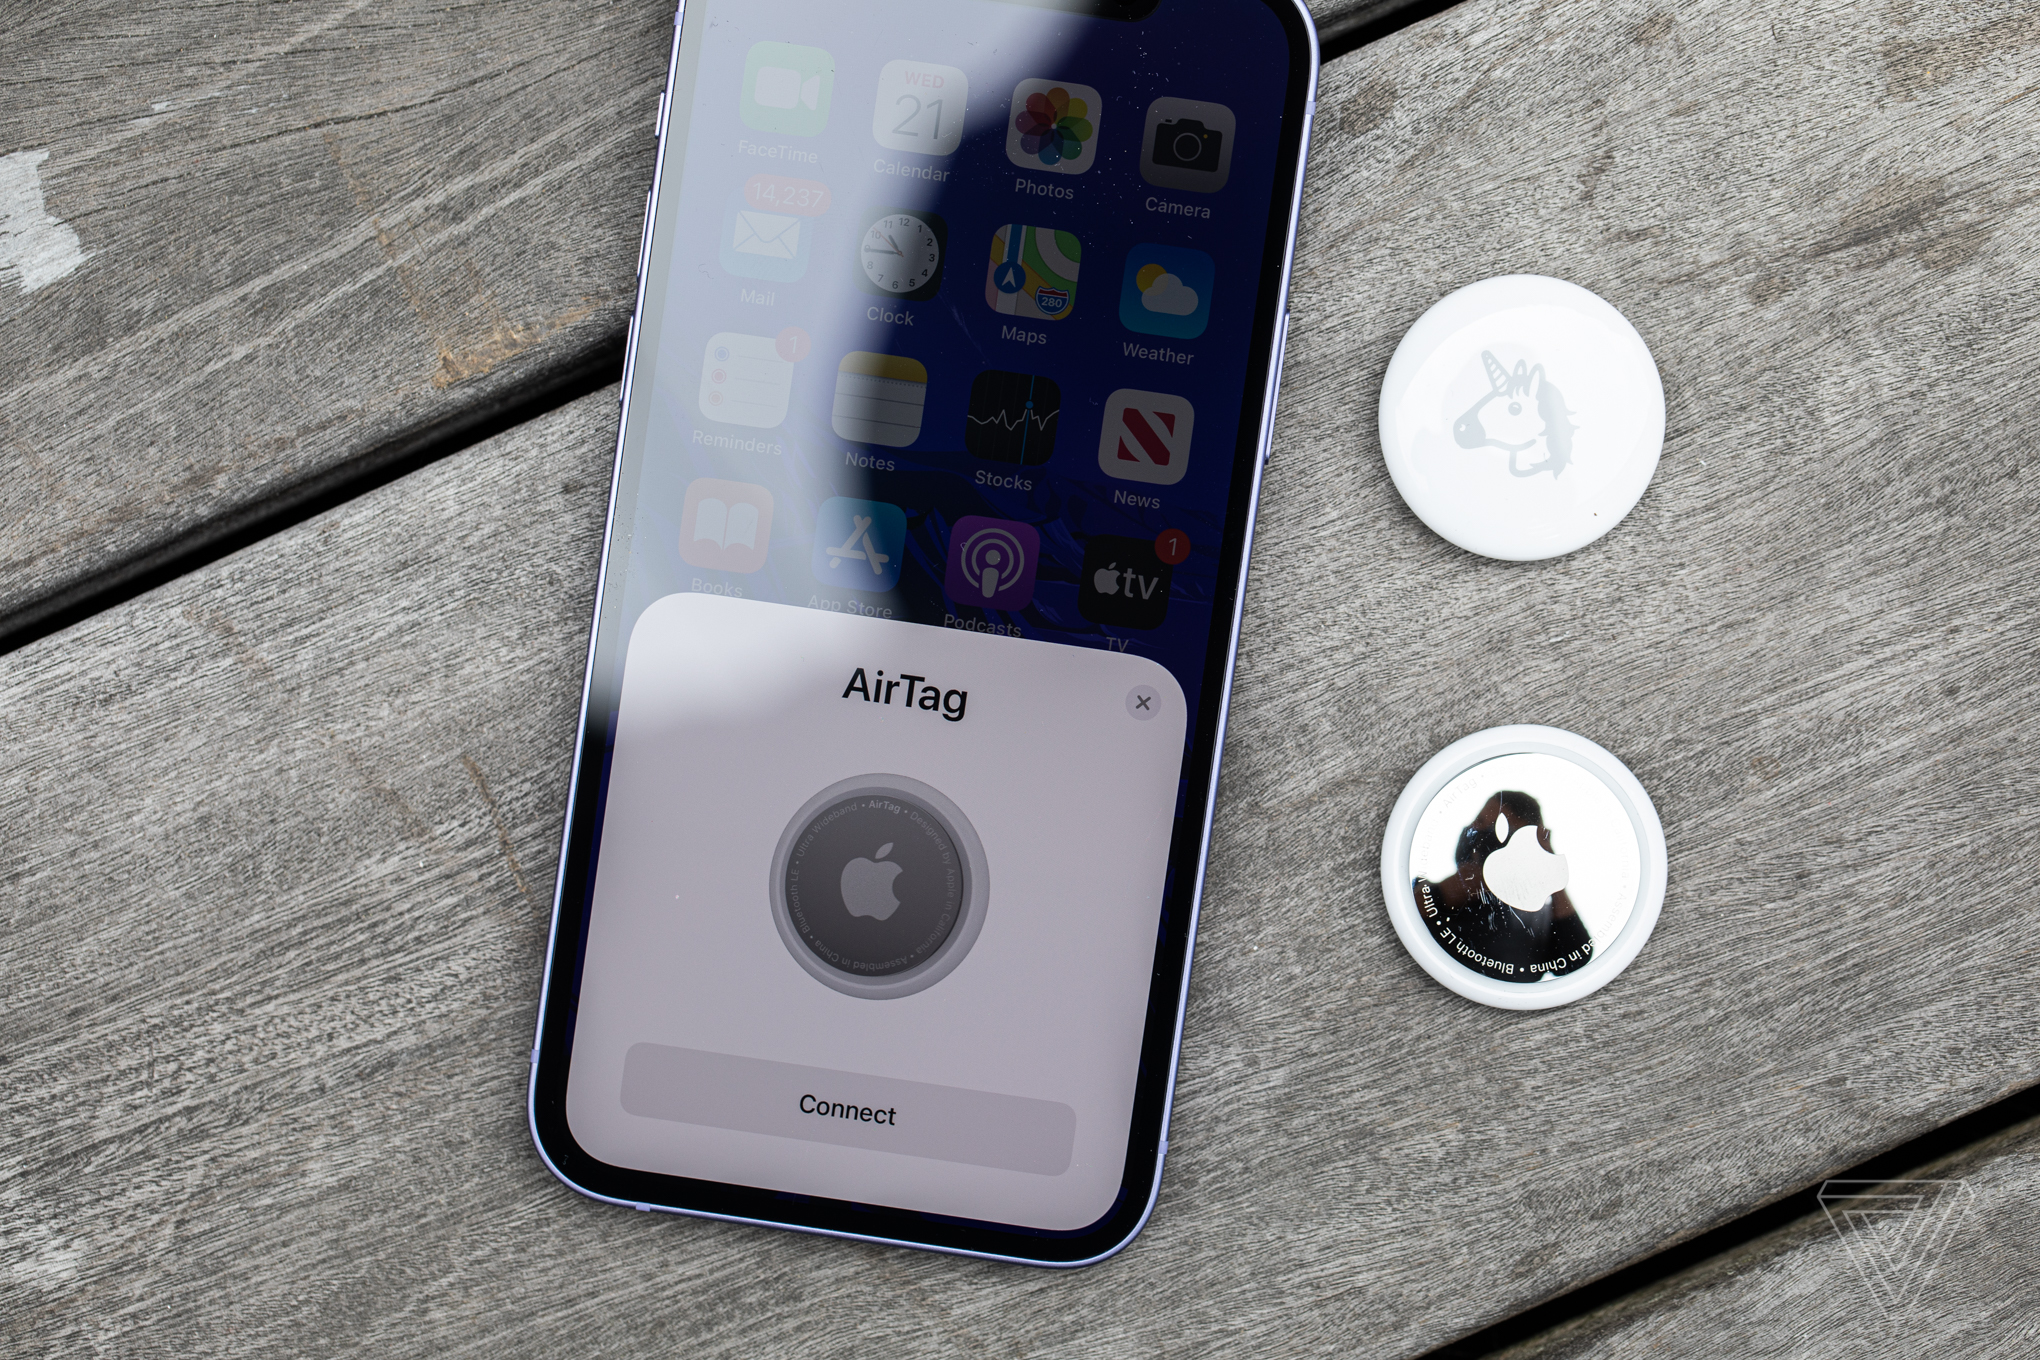 The pairing process for AirTags is just like pairing AirPods